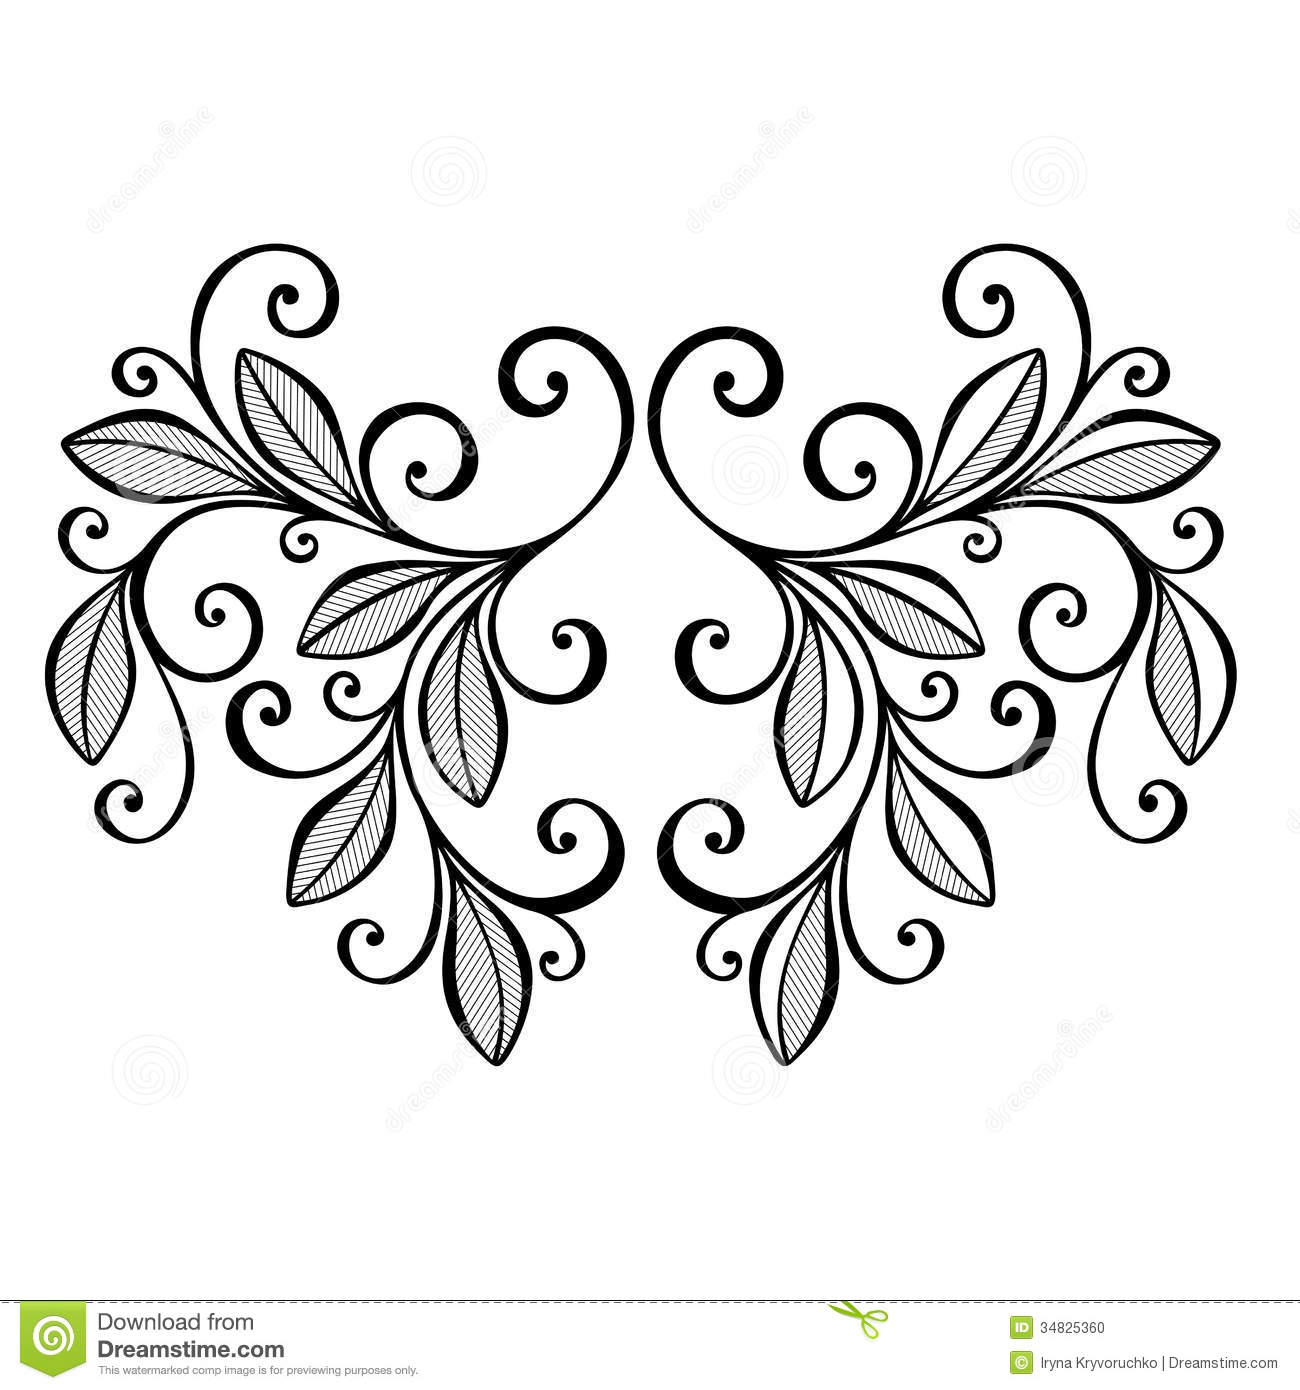 Design with Decorative Leaves